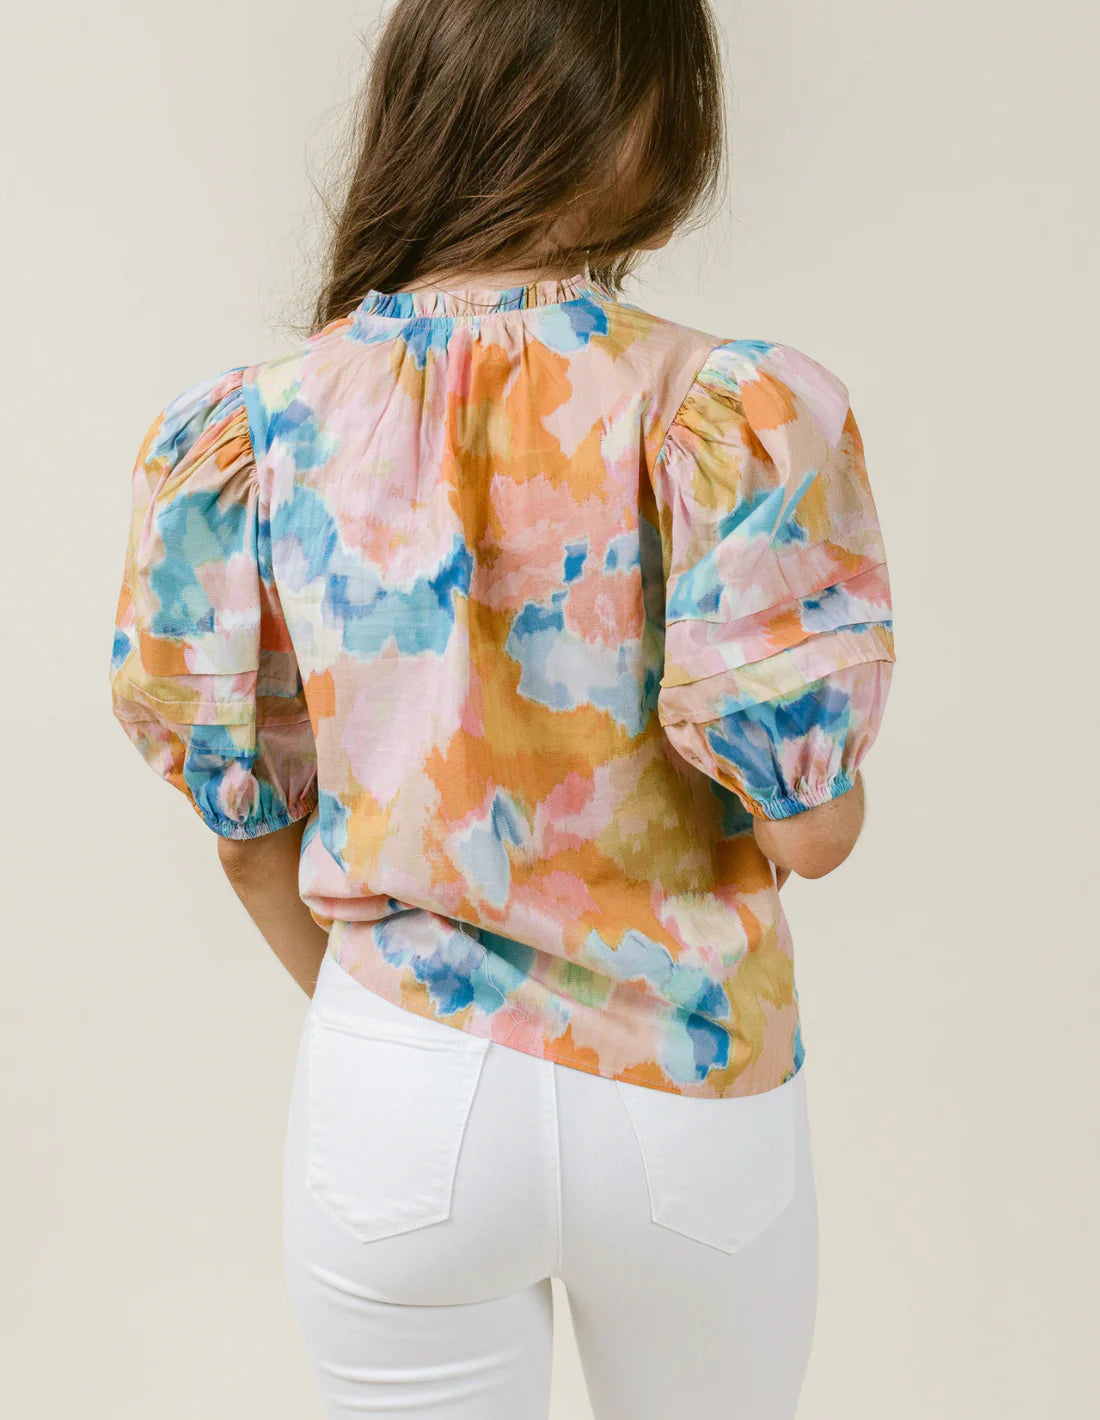 Alix Blouse in Paint Pallet - The French Shoppe